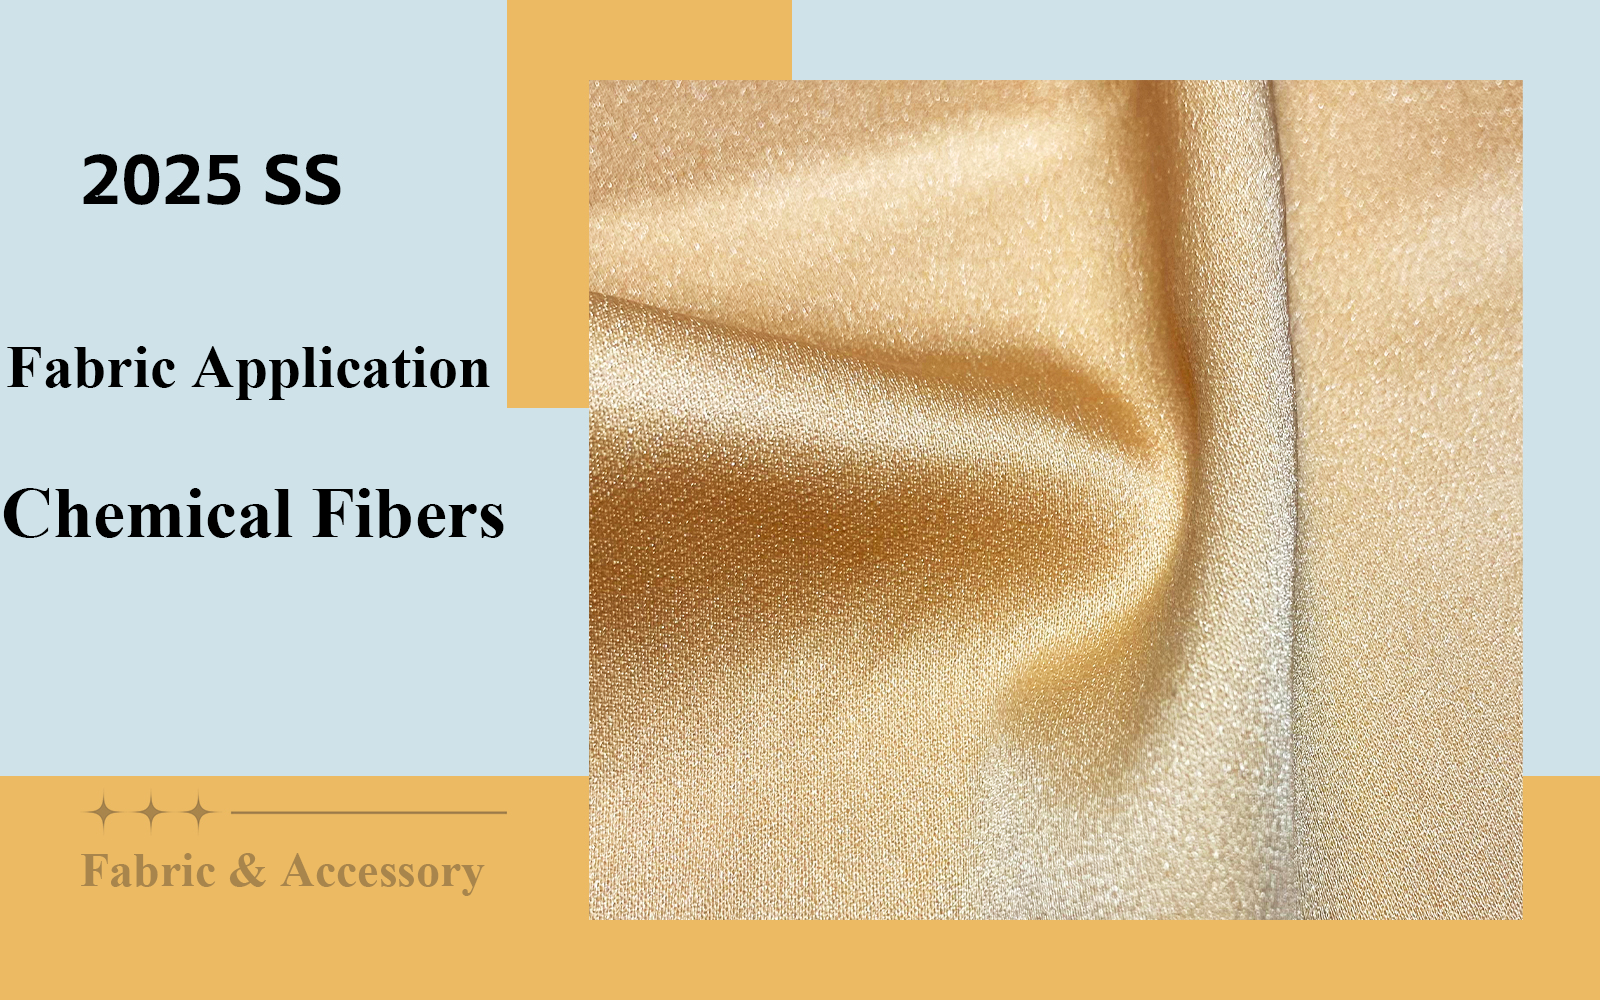 The Fabric Application Trend for Women's Chemical Fiber